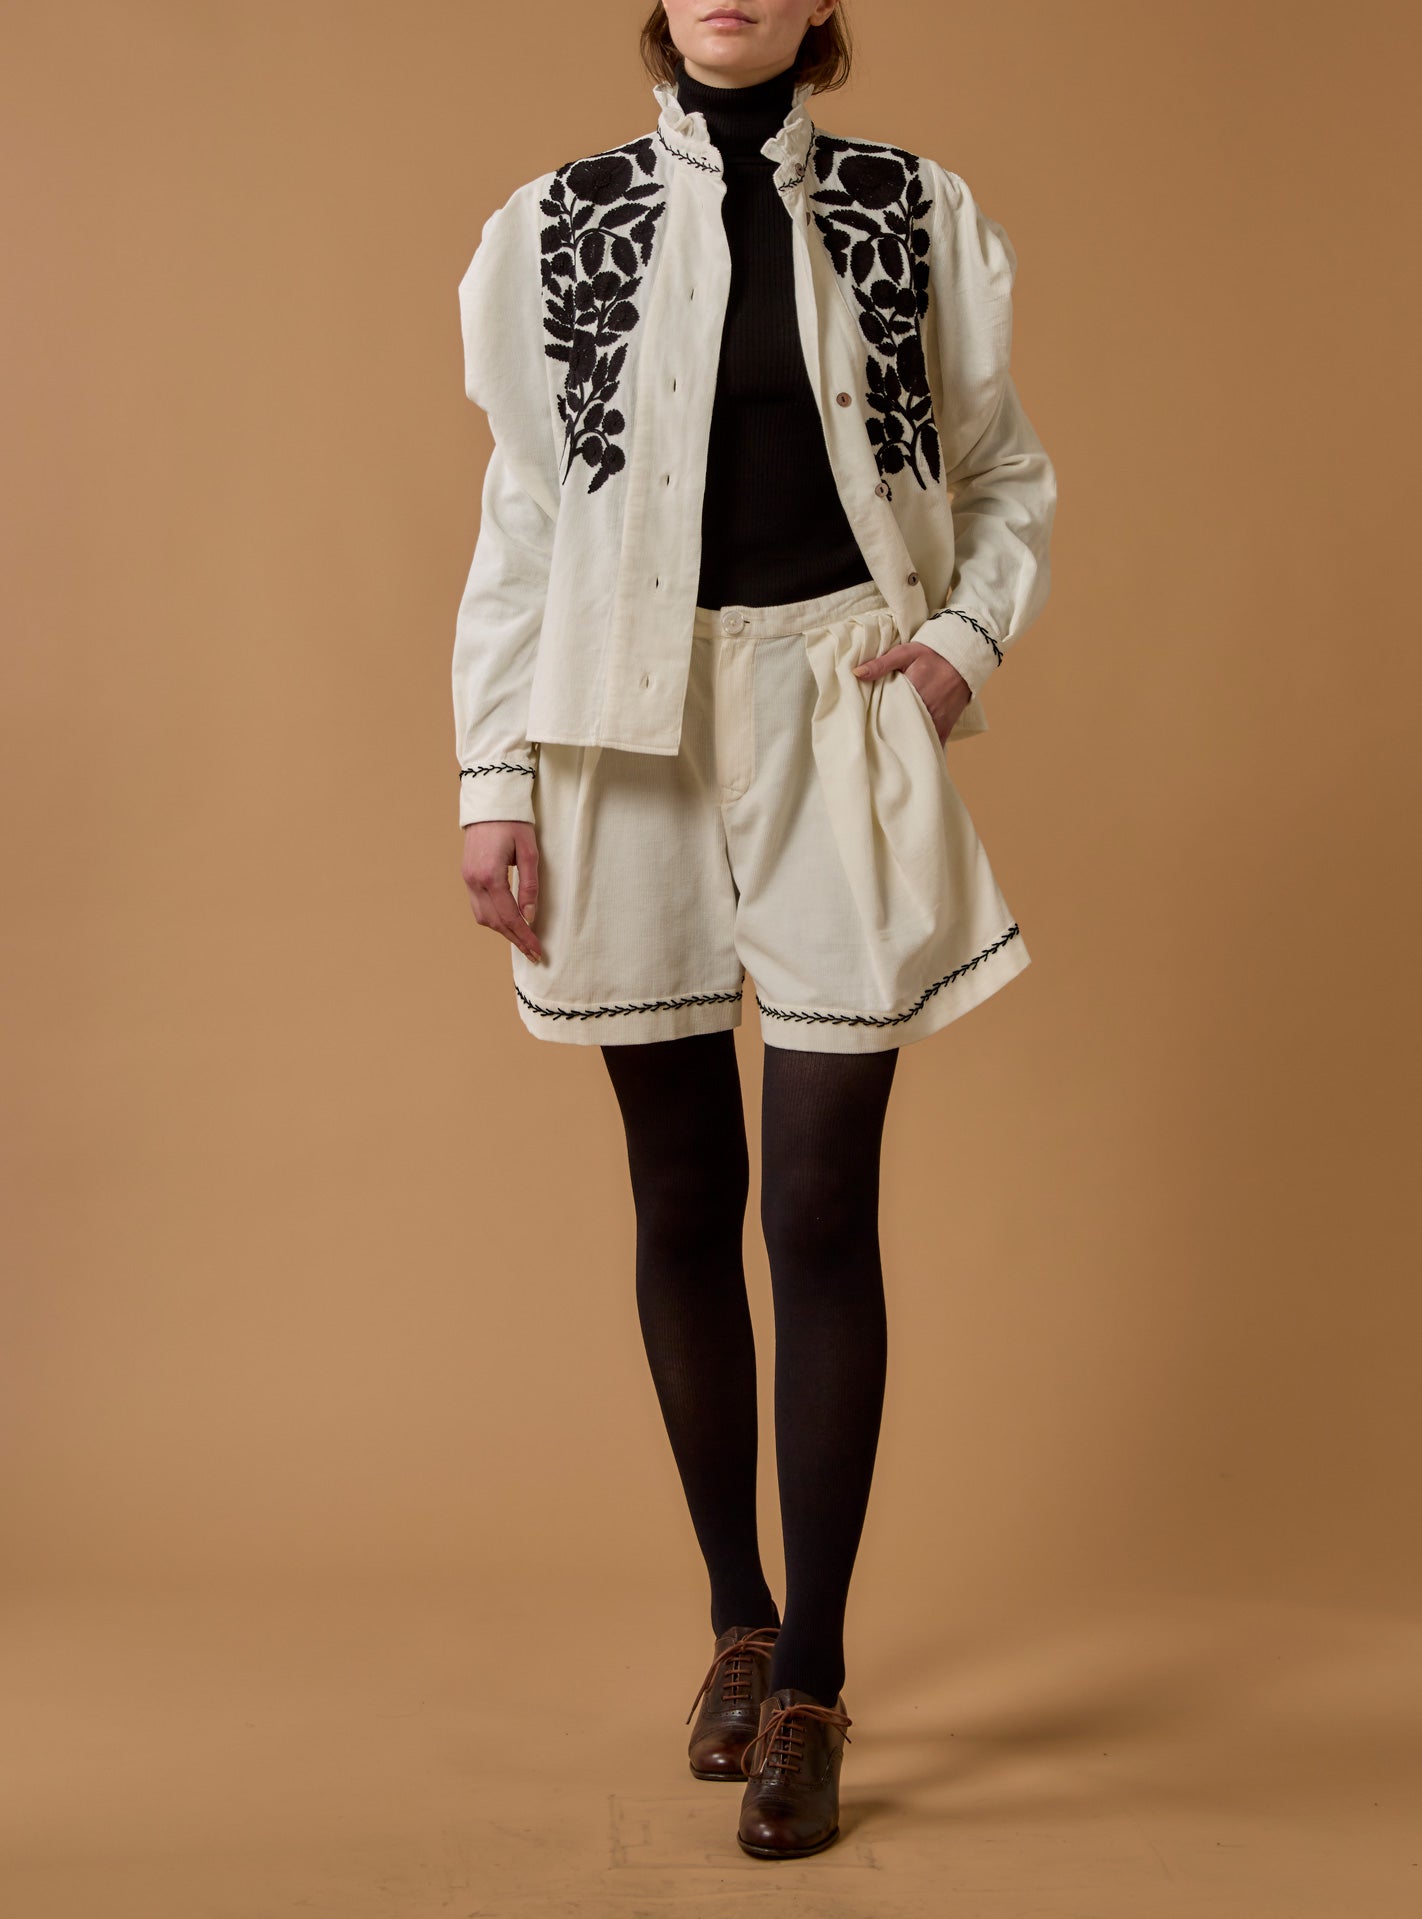 Large view of open Wind Cream/Black Blouse with Kenya Shorts - Embroidered Corduroy by Thierry Colson